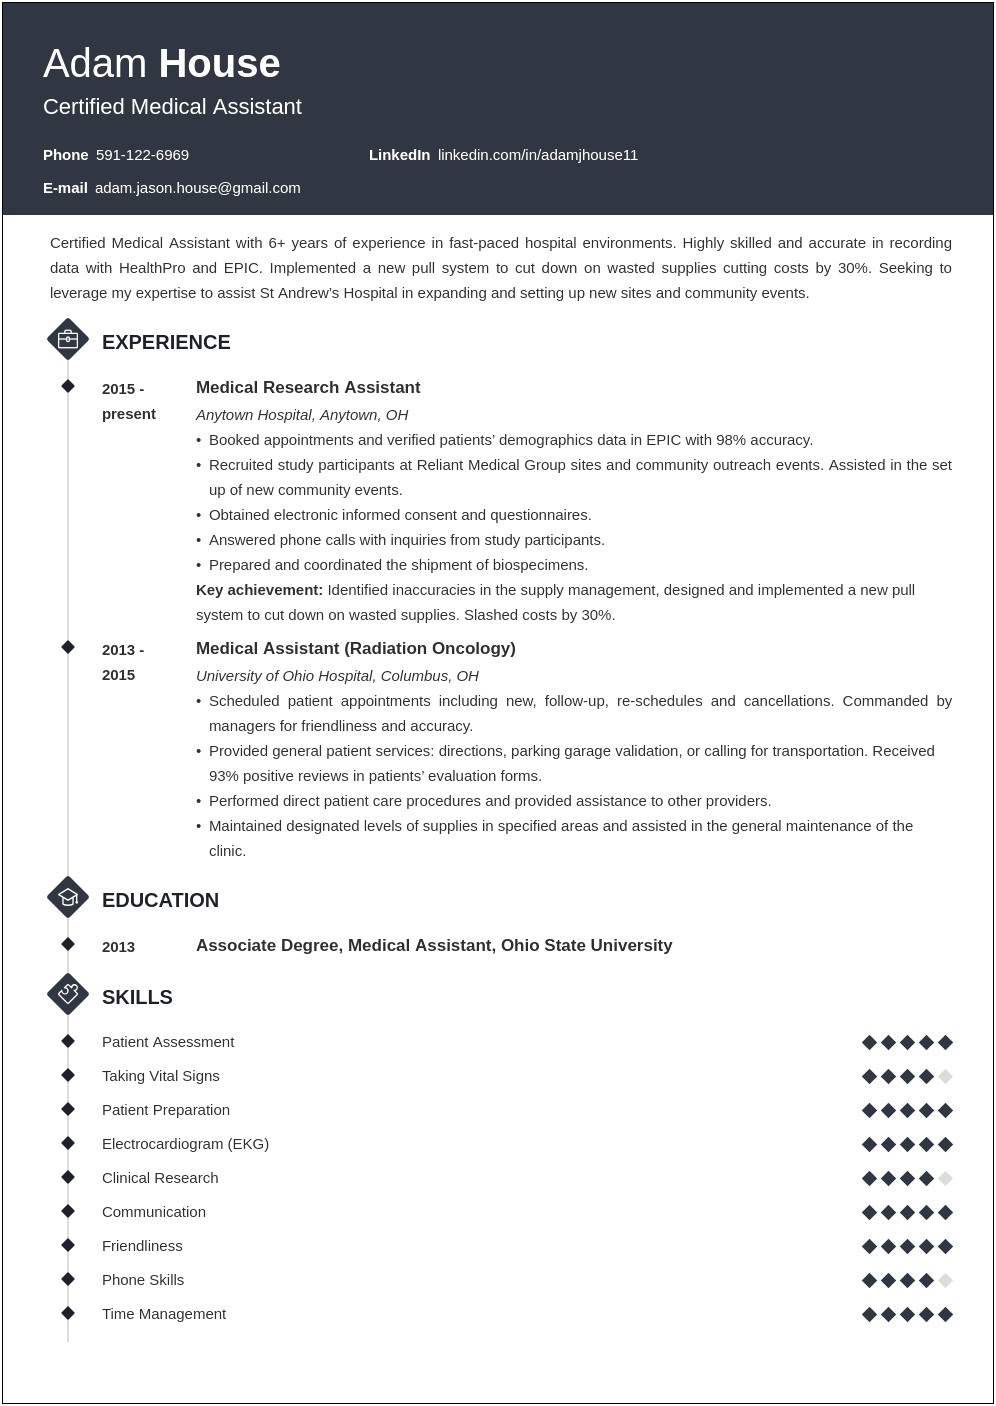 Summary To Put On Resume For Medical Assistant